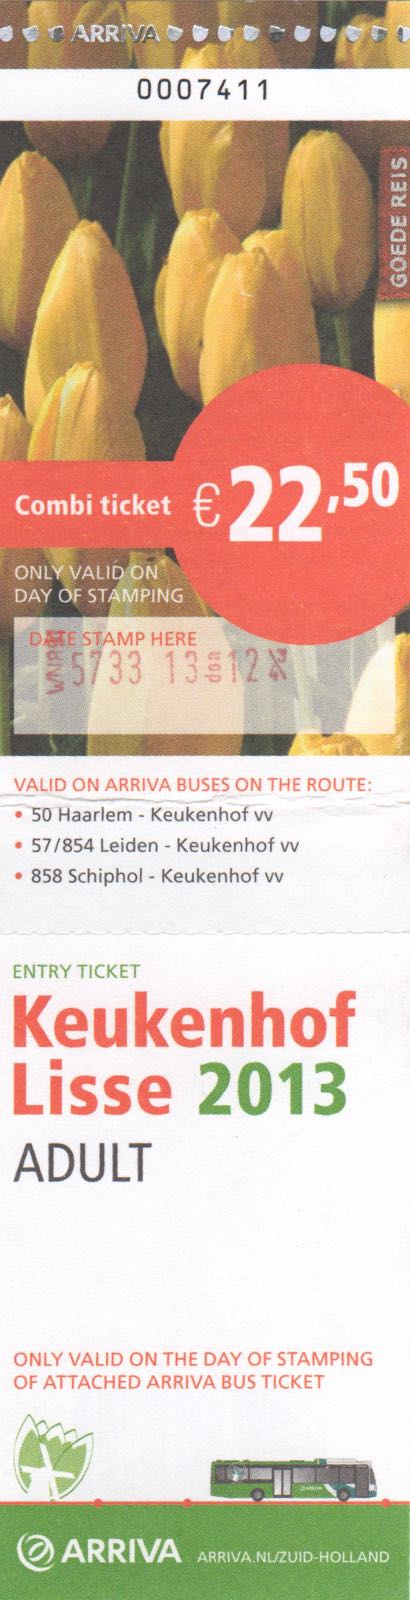 ticket for Arriva bus and entrance to Keukenhof (2013)